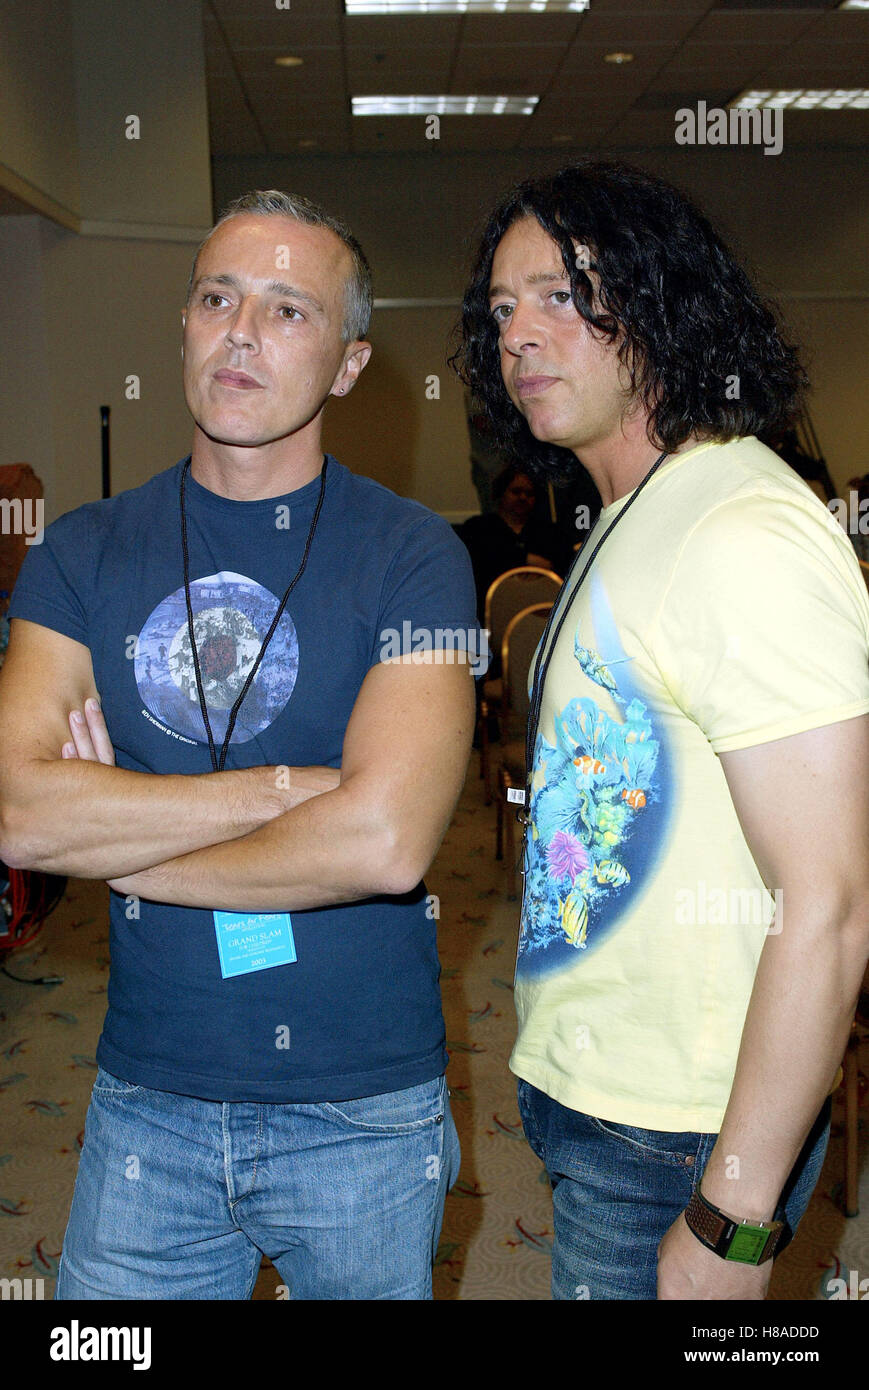 TEARS FOR FEARS 8TH ANDRE AGASSI GRAND SLAM BE MGM GRAND HOTEL LAS VEGAS USA 13 October 2003 Stock Photo